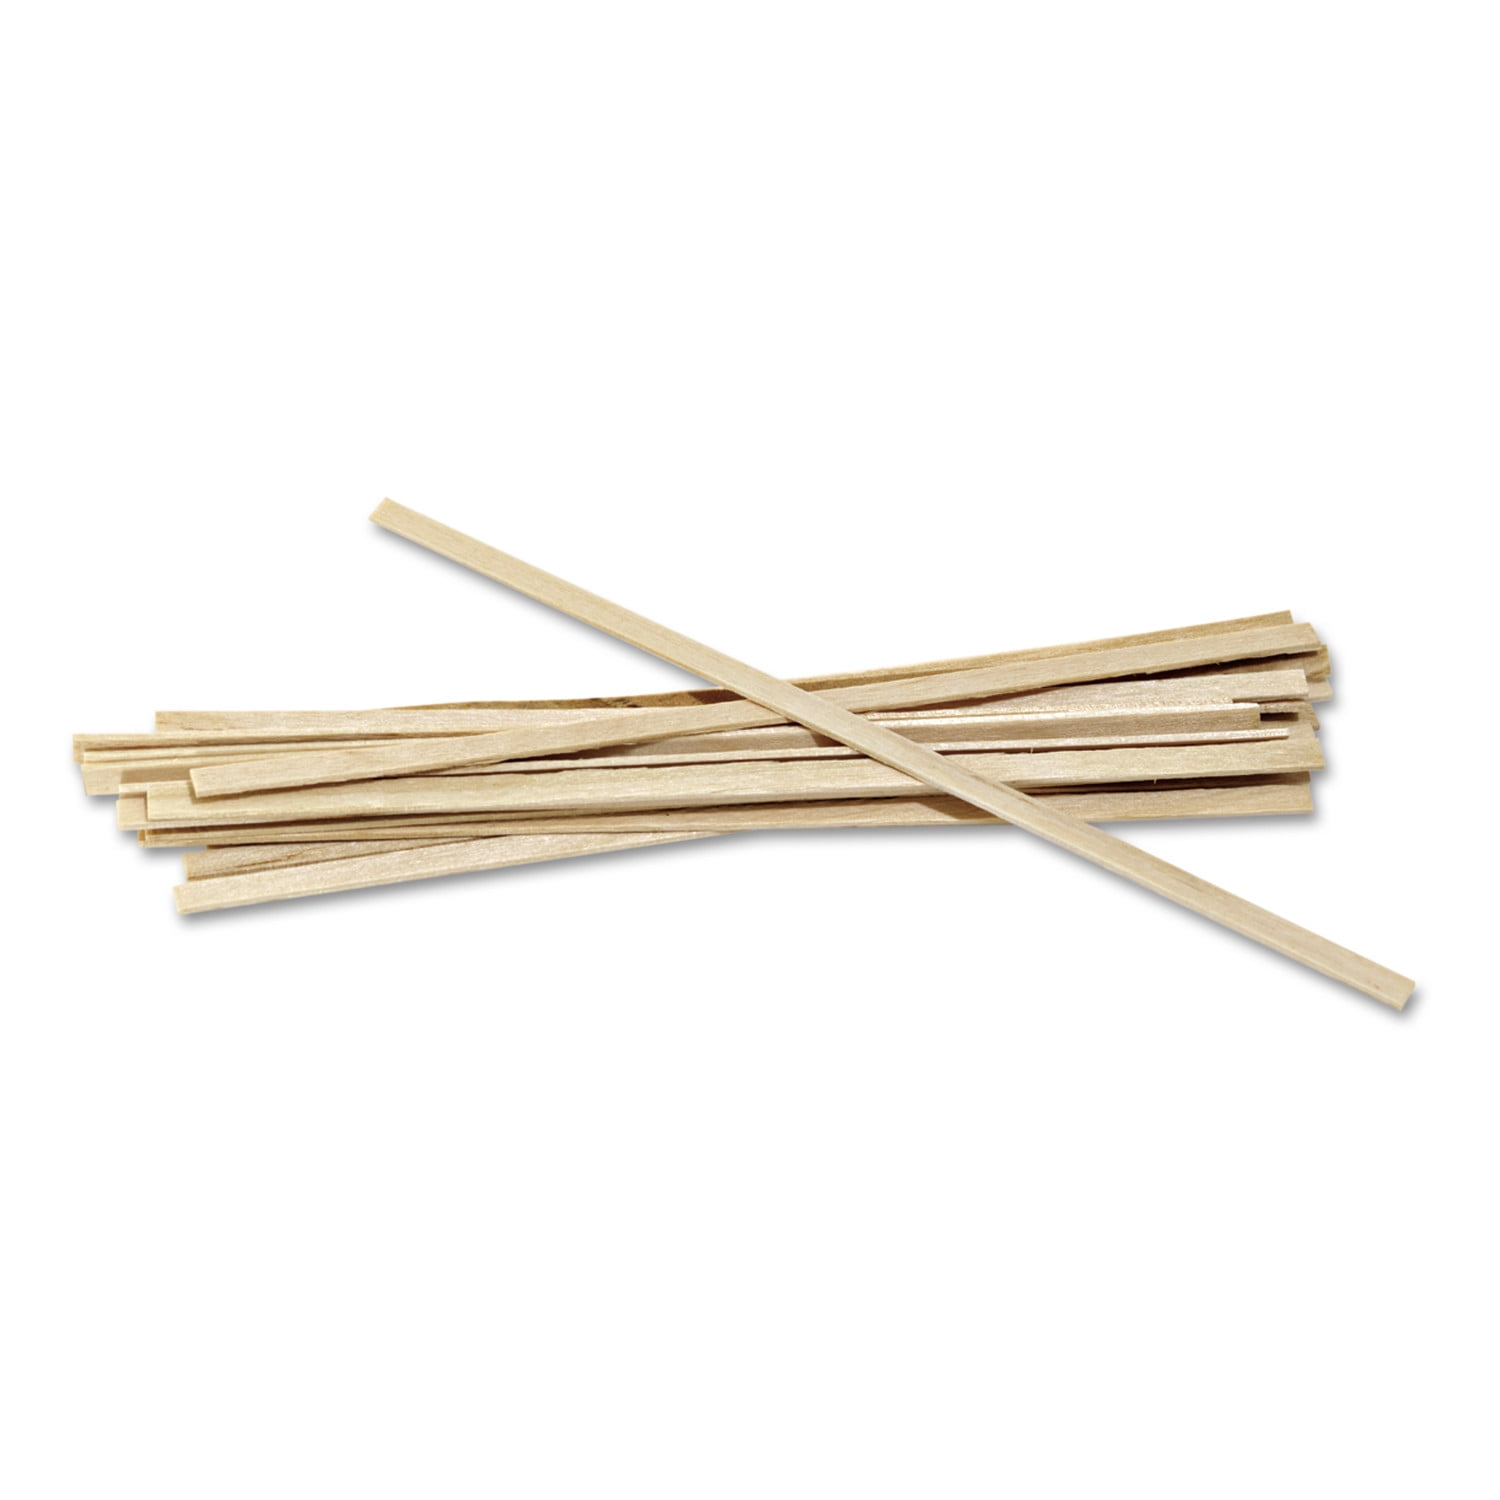 5.5" Details about   Royal 1000 Count Wood Coffee Beverage Stirrers 